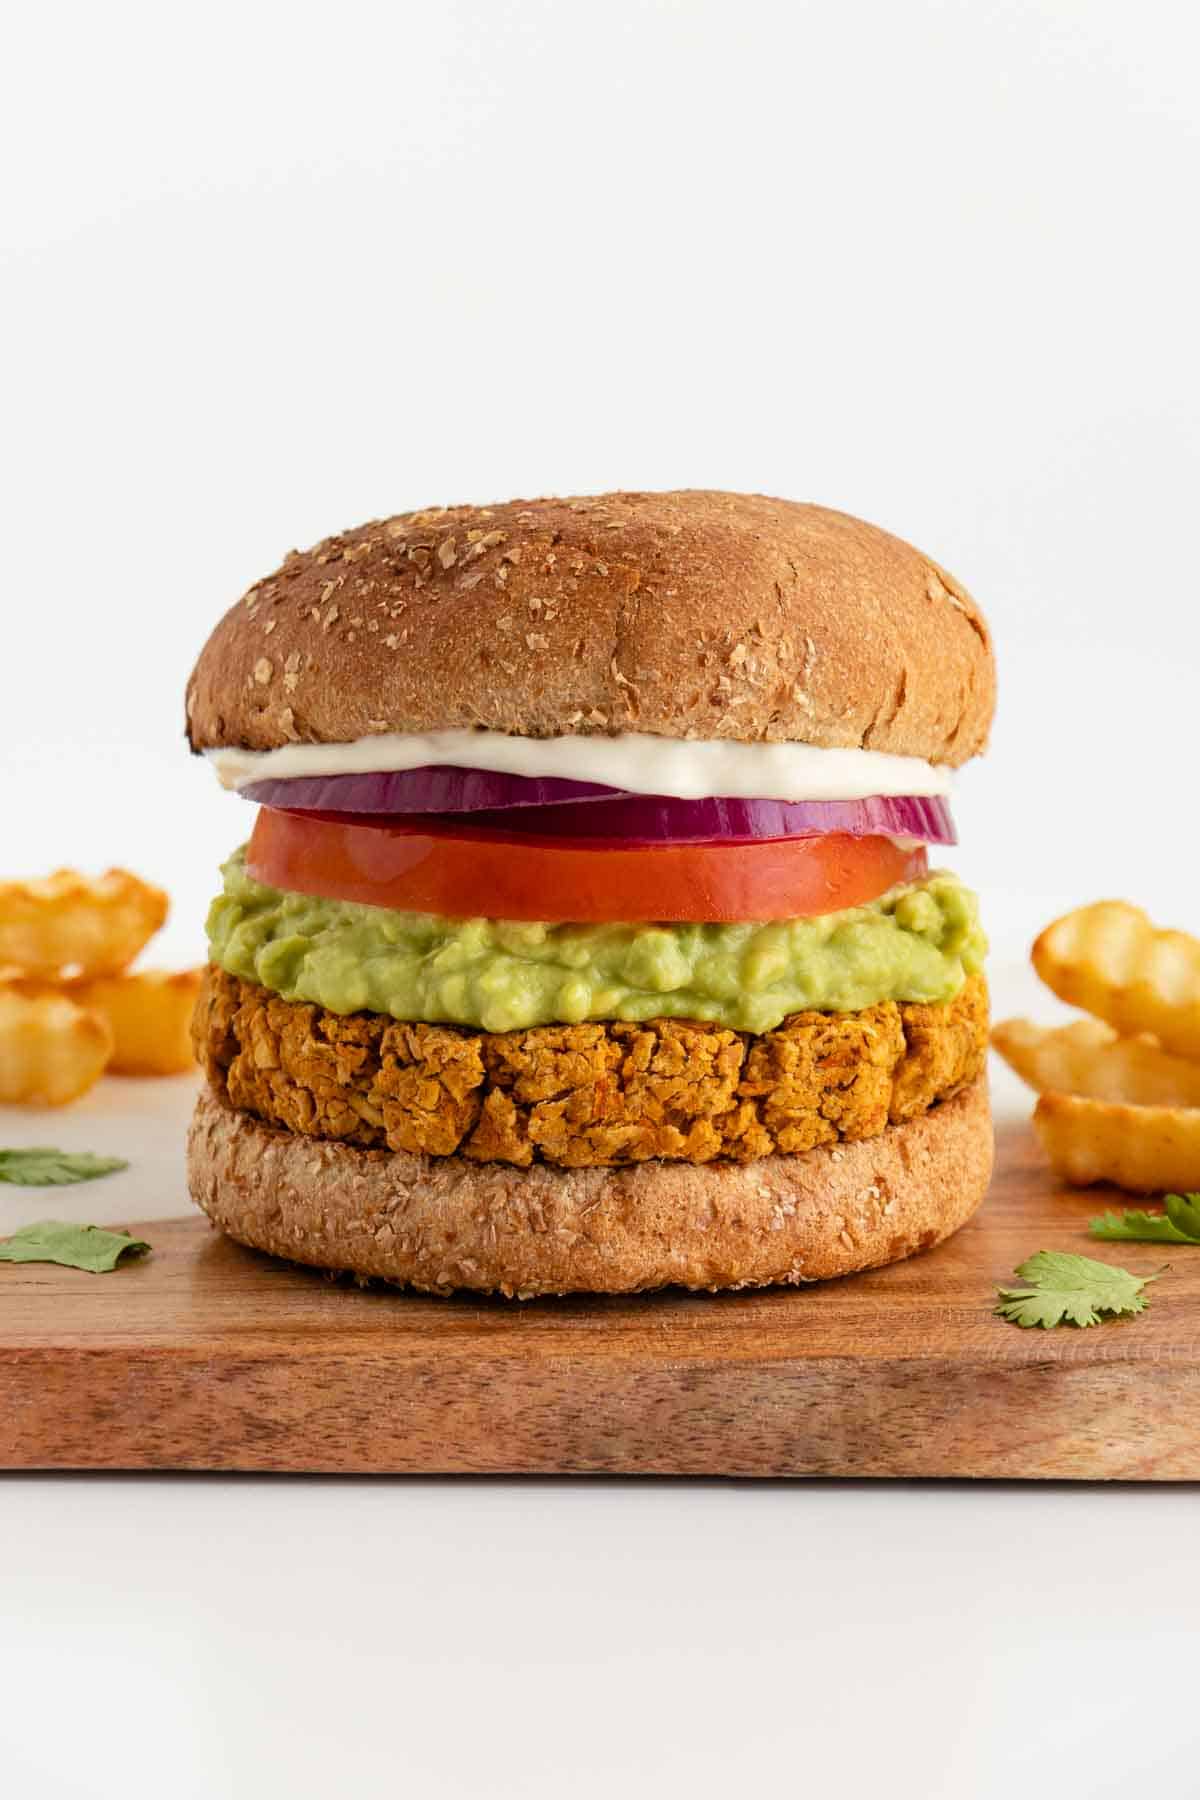 a vegan chickpea burger between two buns with mashed avocado, tomato, red onion, and mayo surrounded by crinkle cut french fries